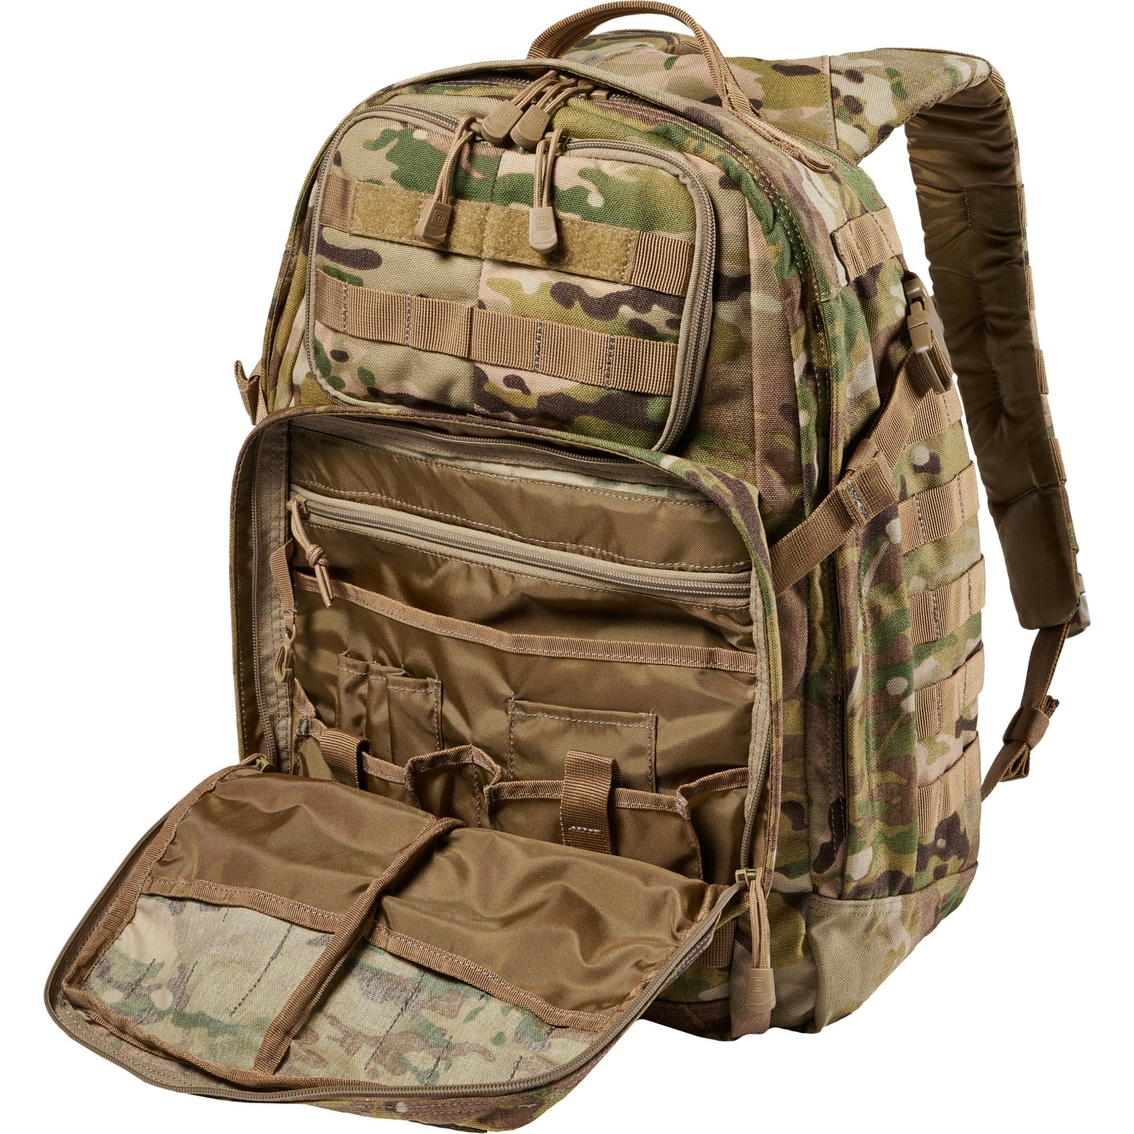 5.11 RUSH 24 2.0 Backpack - Image 7 of 10